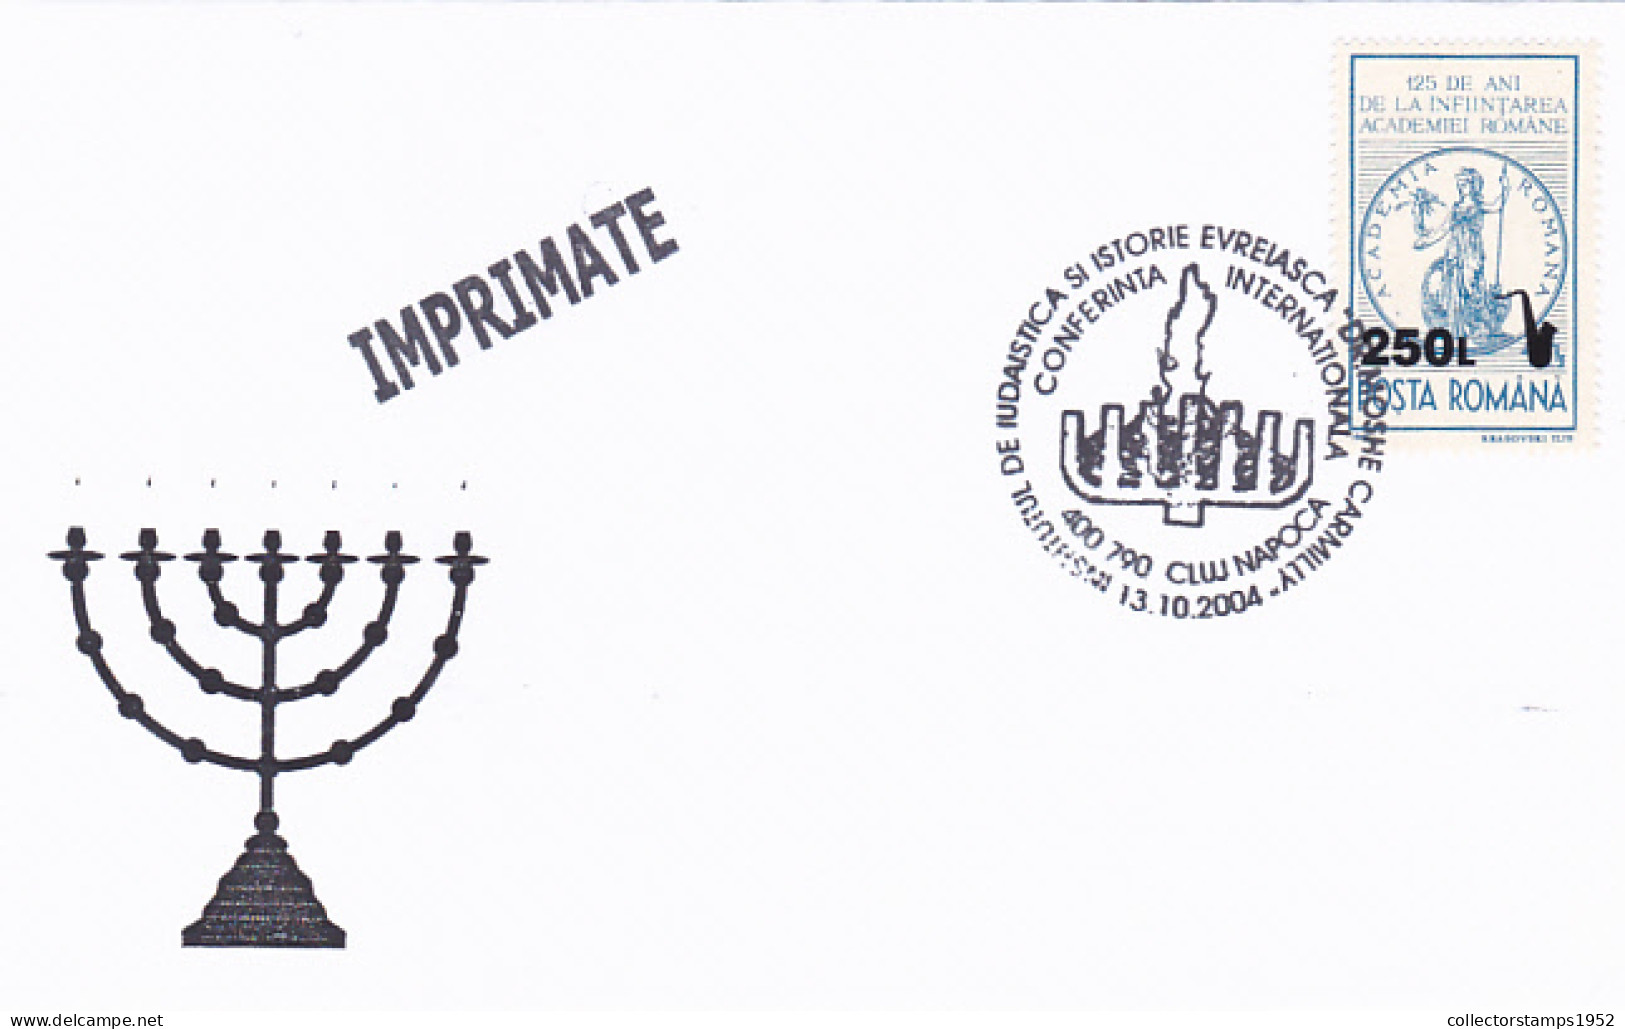 MOSHE CARMILLY JEWISH INSTITUTE, CONFERENCE, JEWISH, RELIGION, SPECIAL COVER, OVERPRINT STAMP, 2004, ROMANIA - Guidaismo